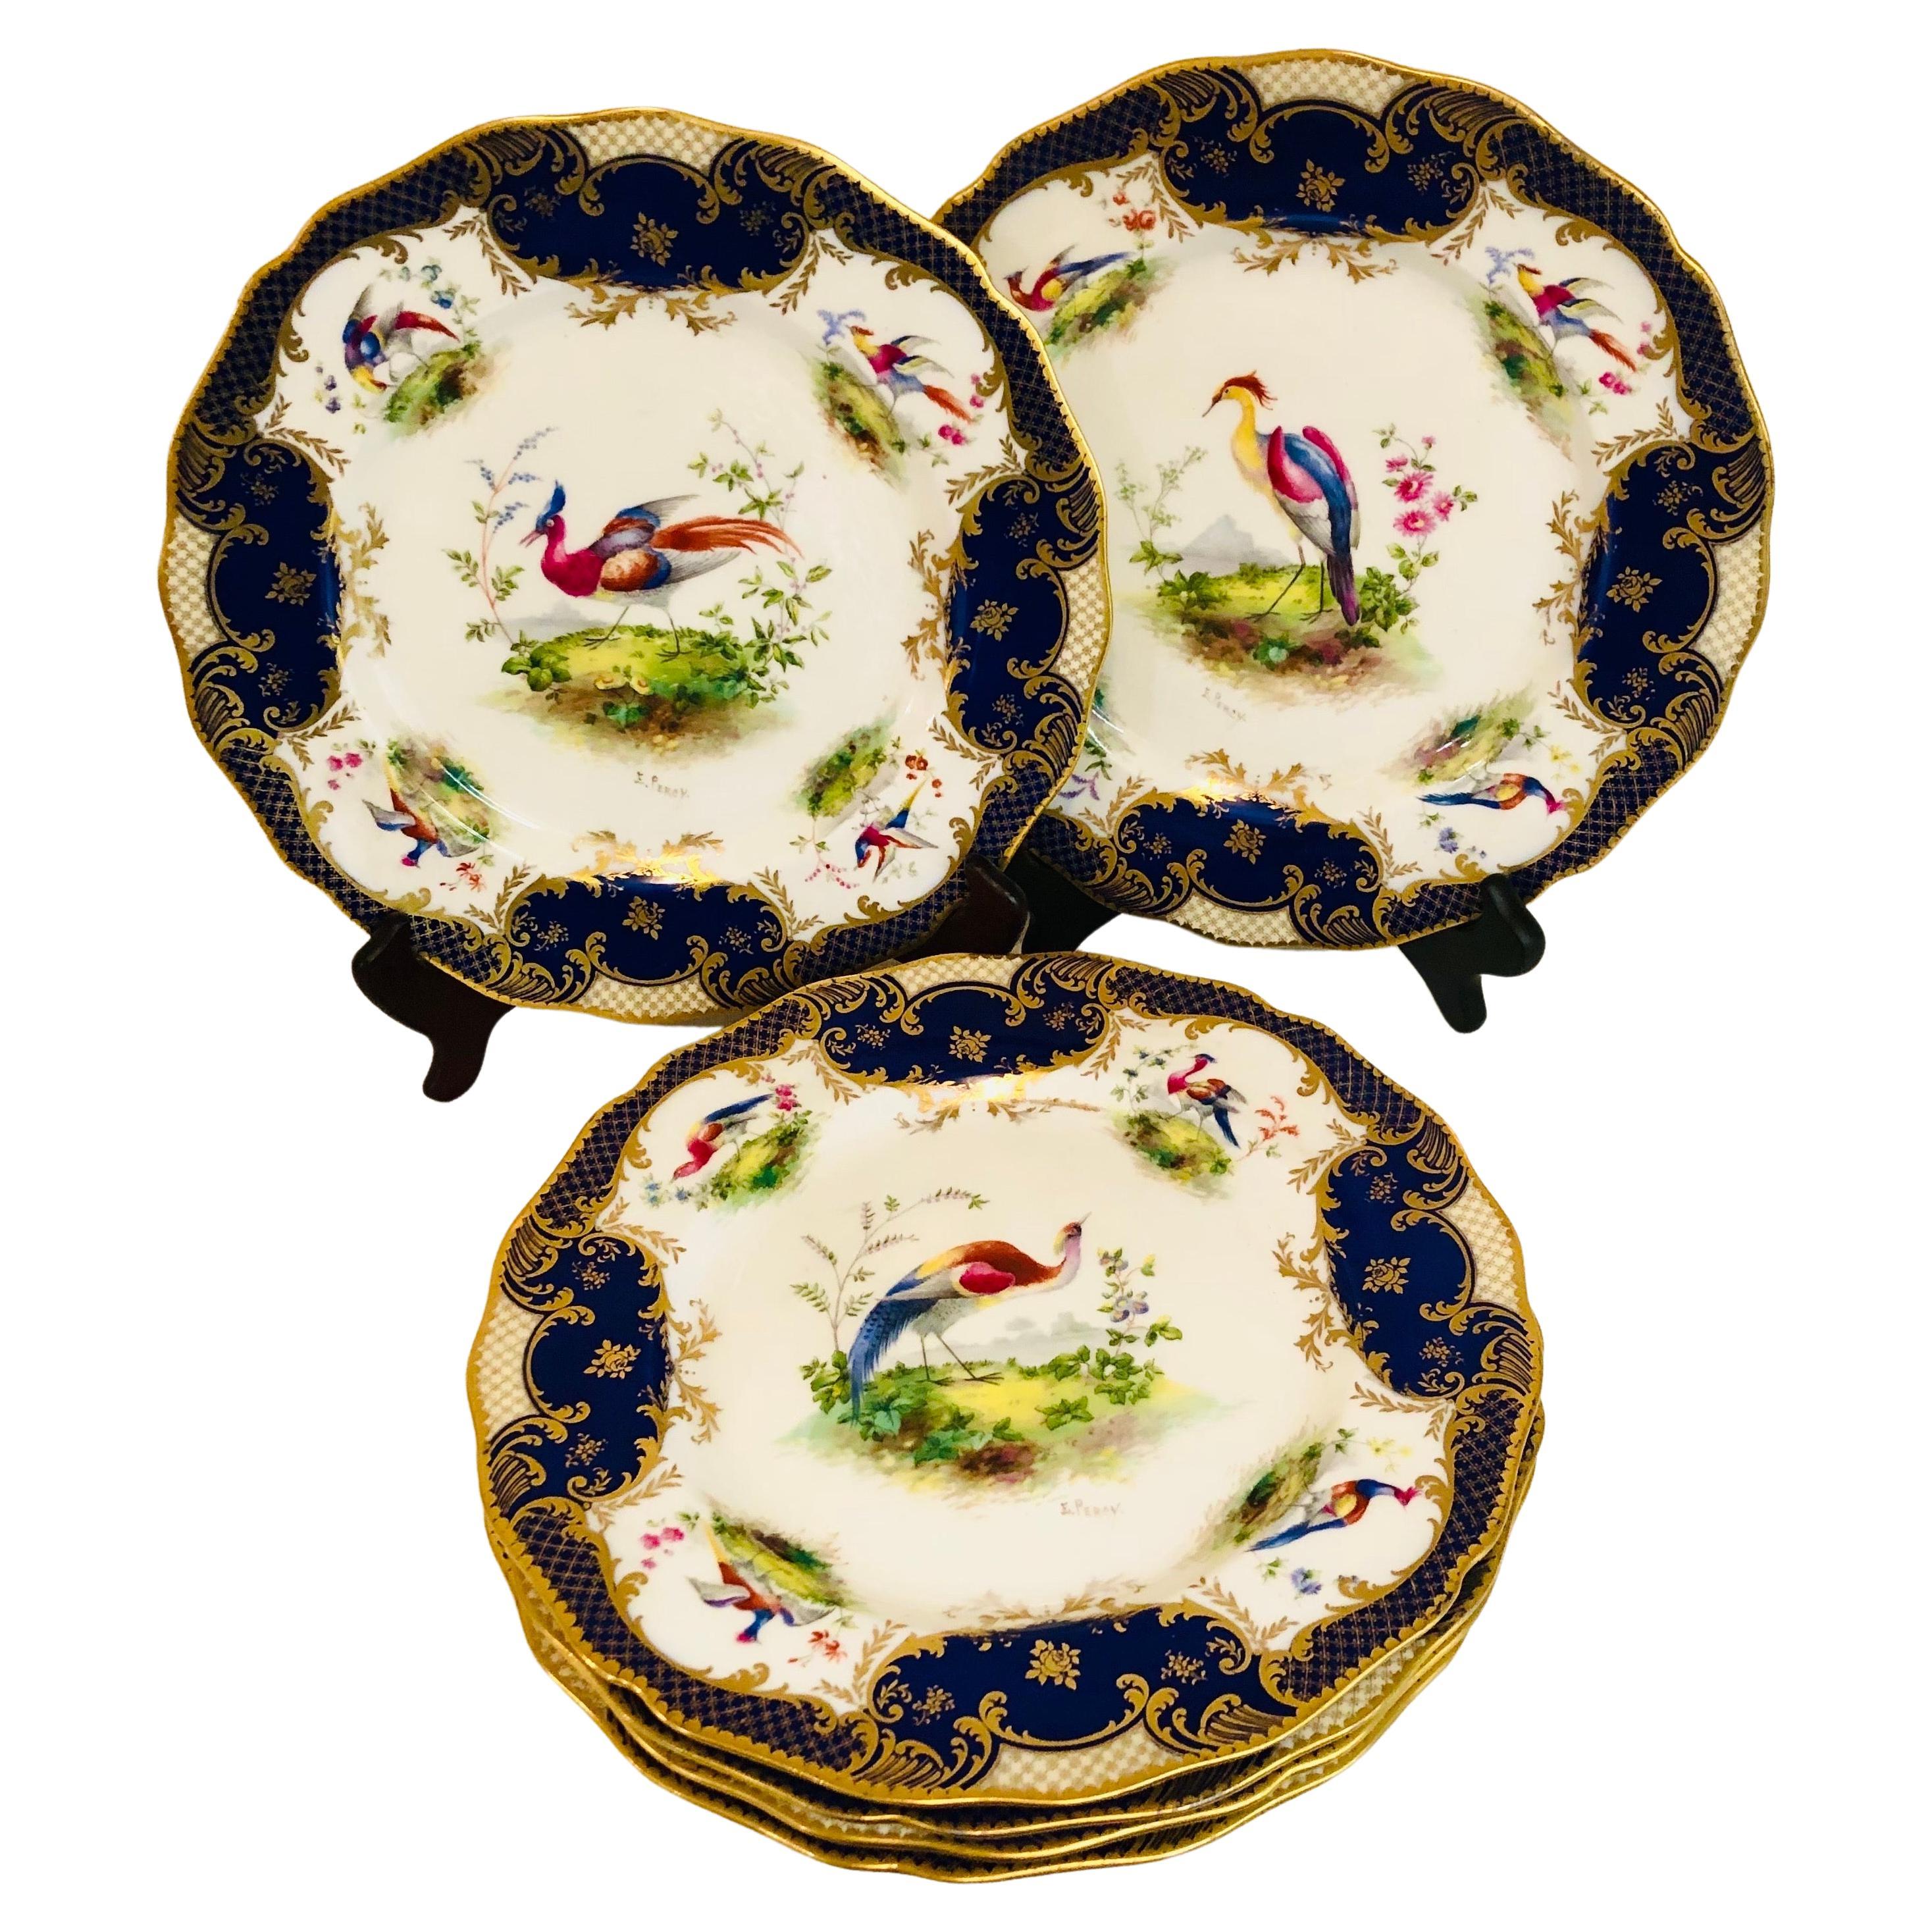 Set of 6 Cobalt Royal Doulton Made for Tiffany Dinner Plates with Exotic Birds